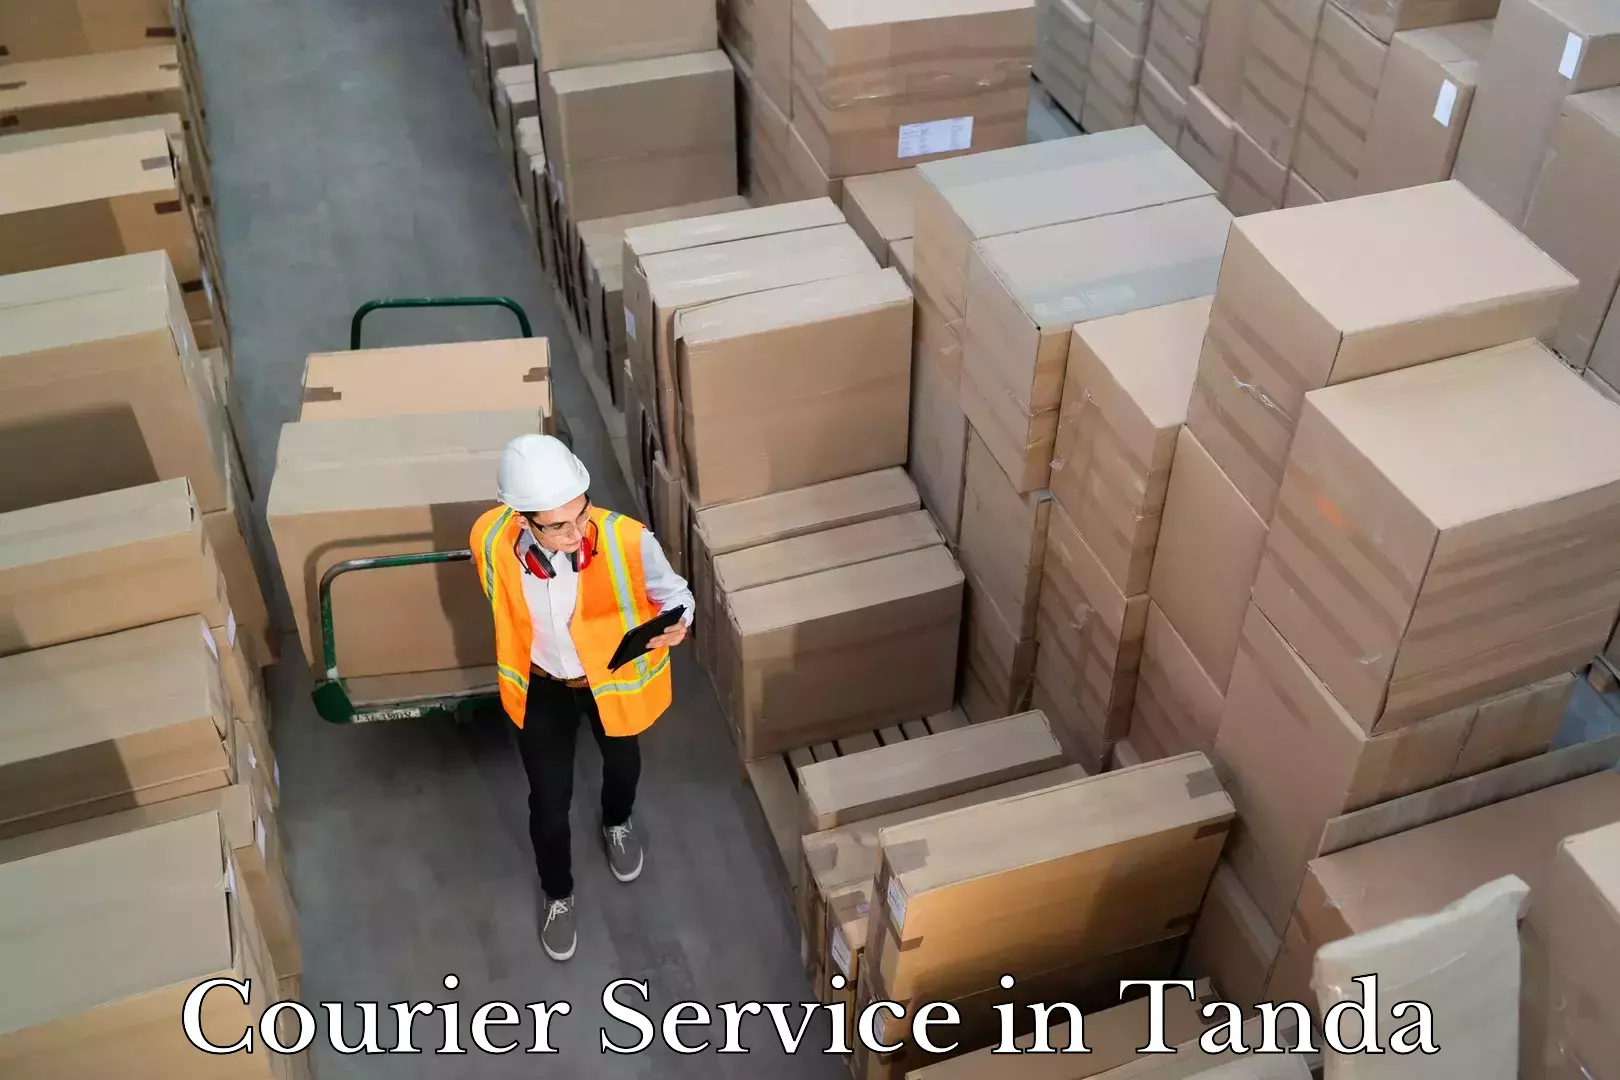 Postal and courier services in Tanda